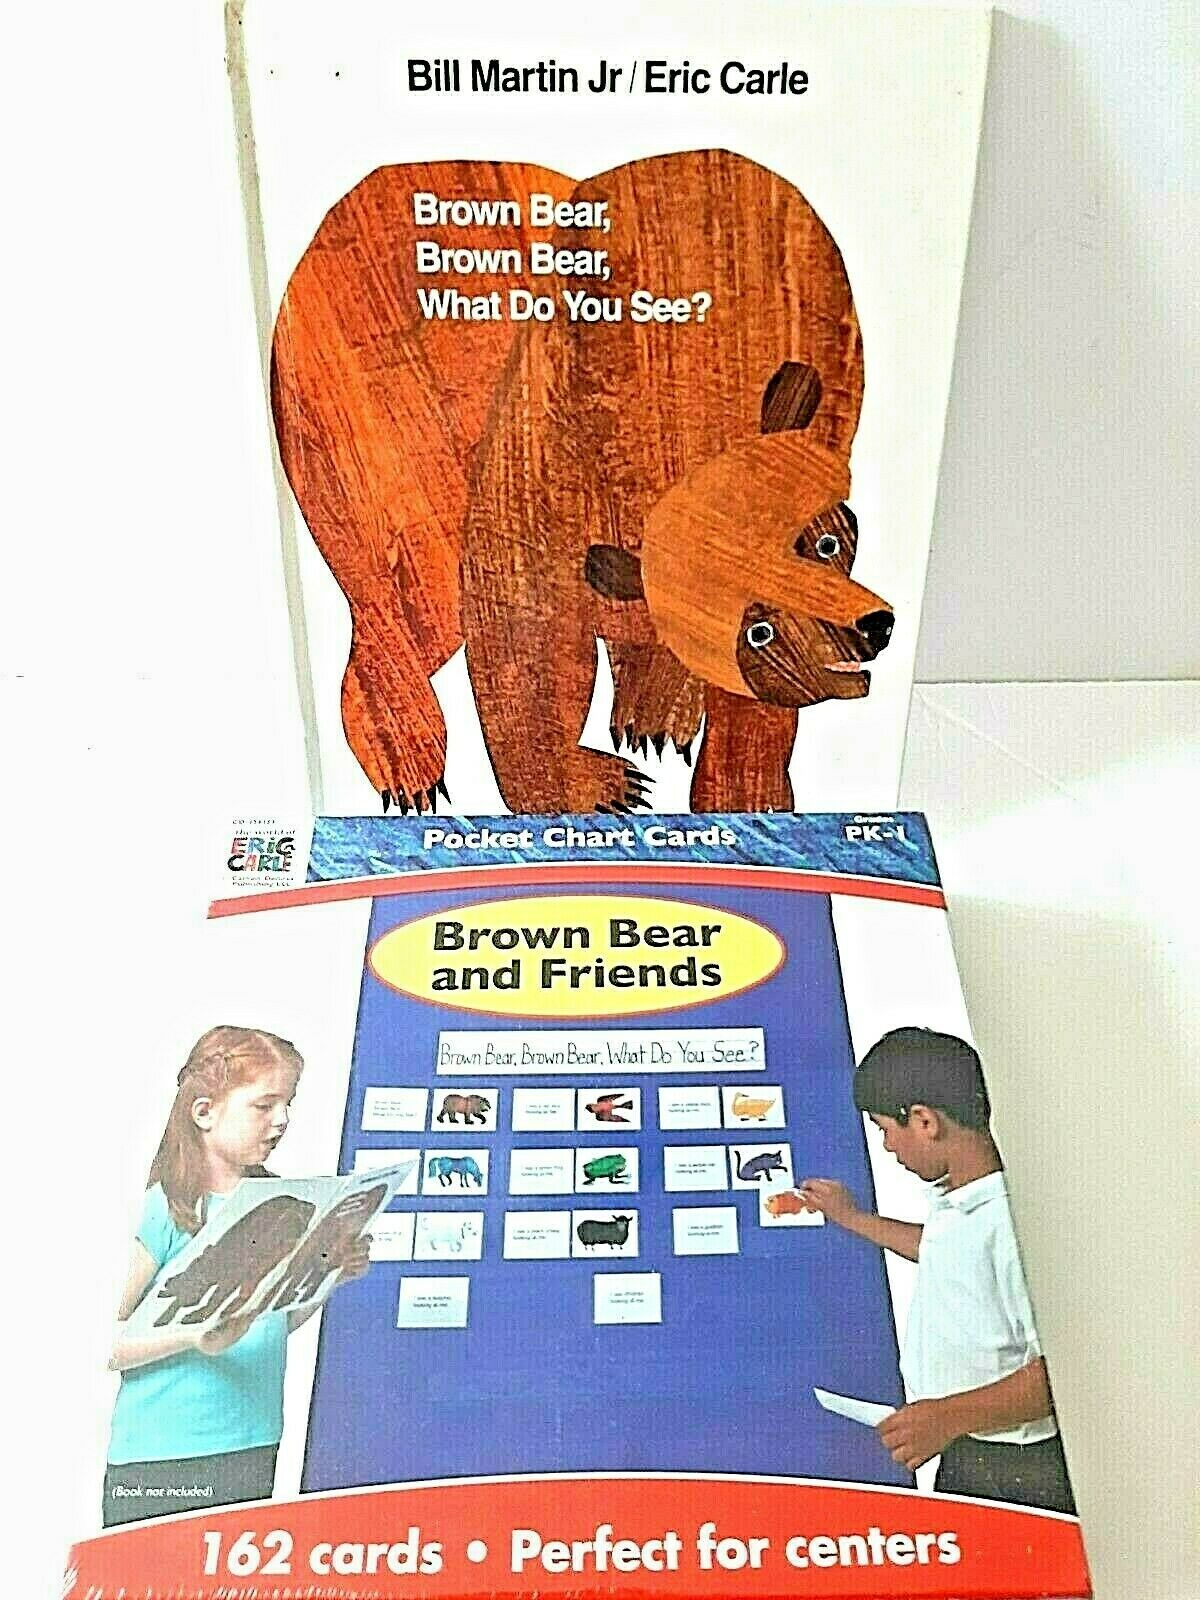 Moving Sale 25%off-carson Dellosa Pocket Chart Cards/book Brown Bear Brown Bear